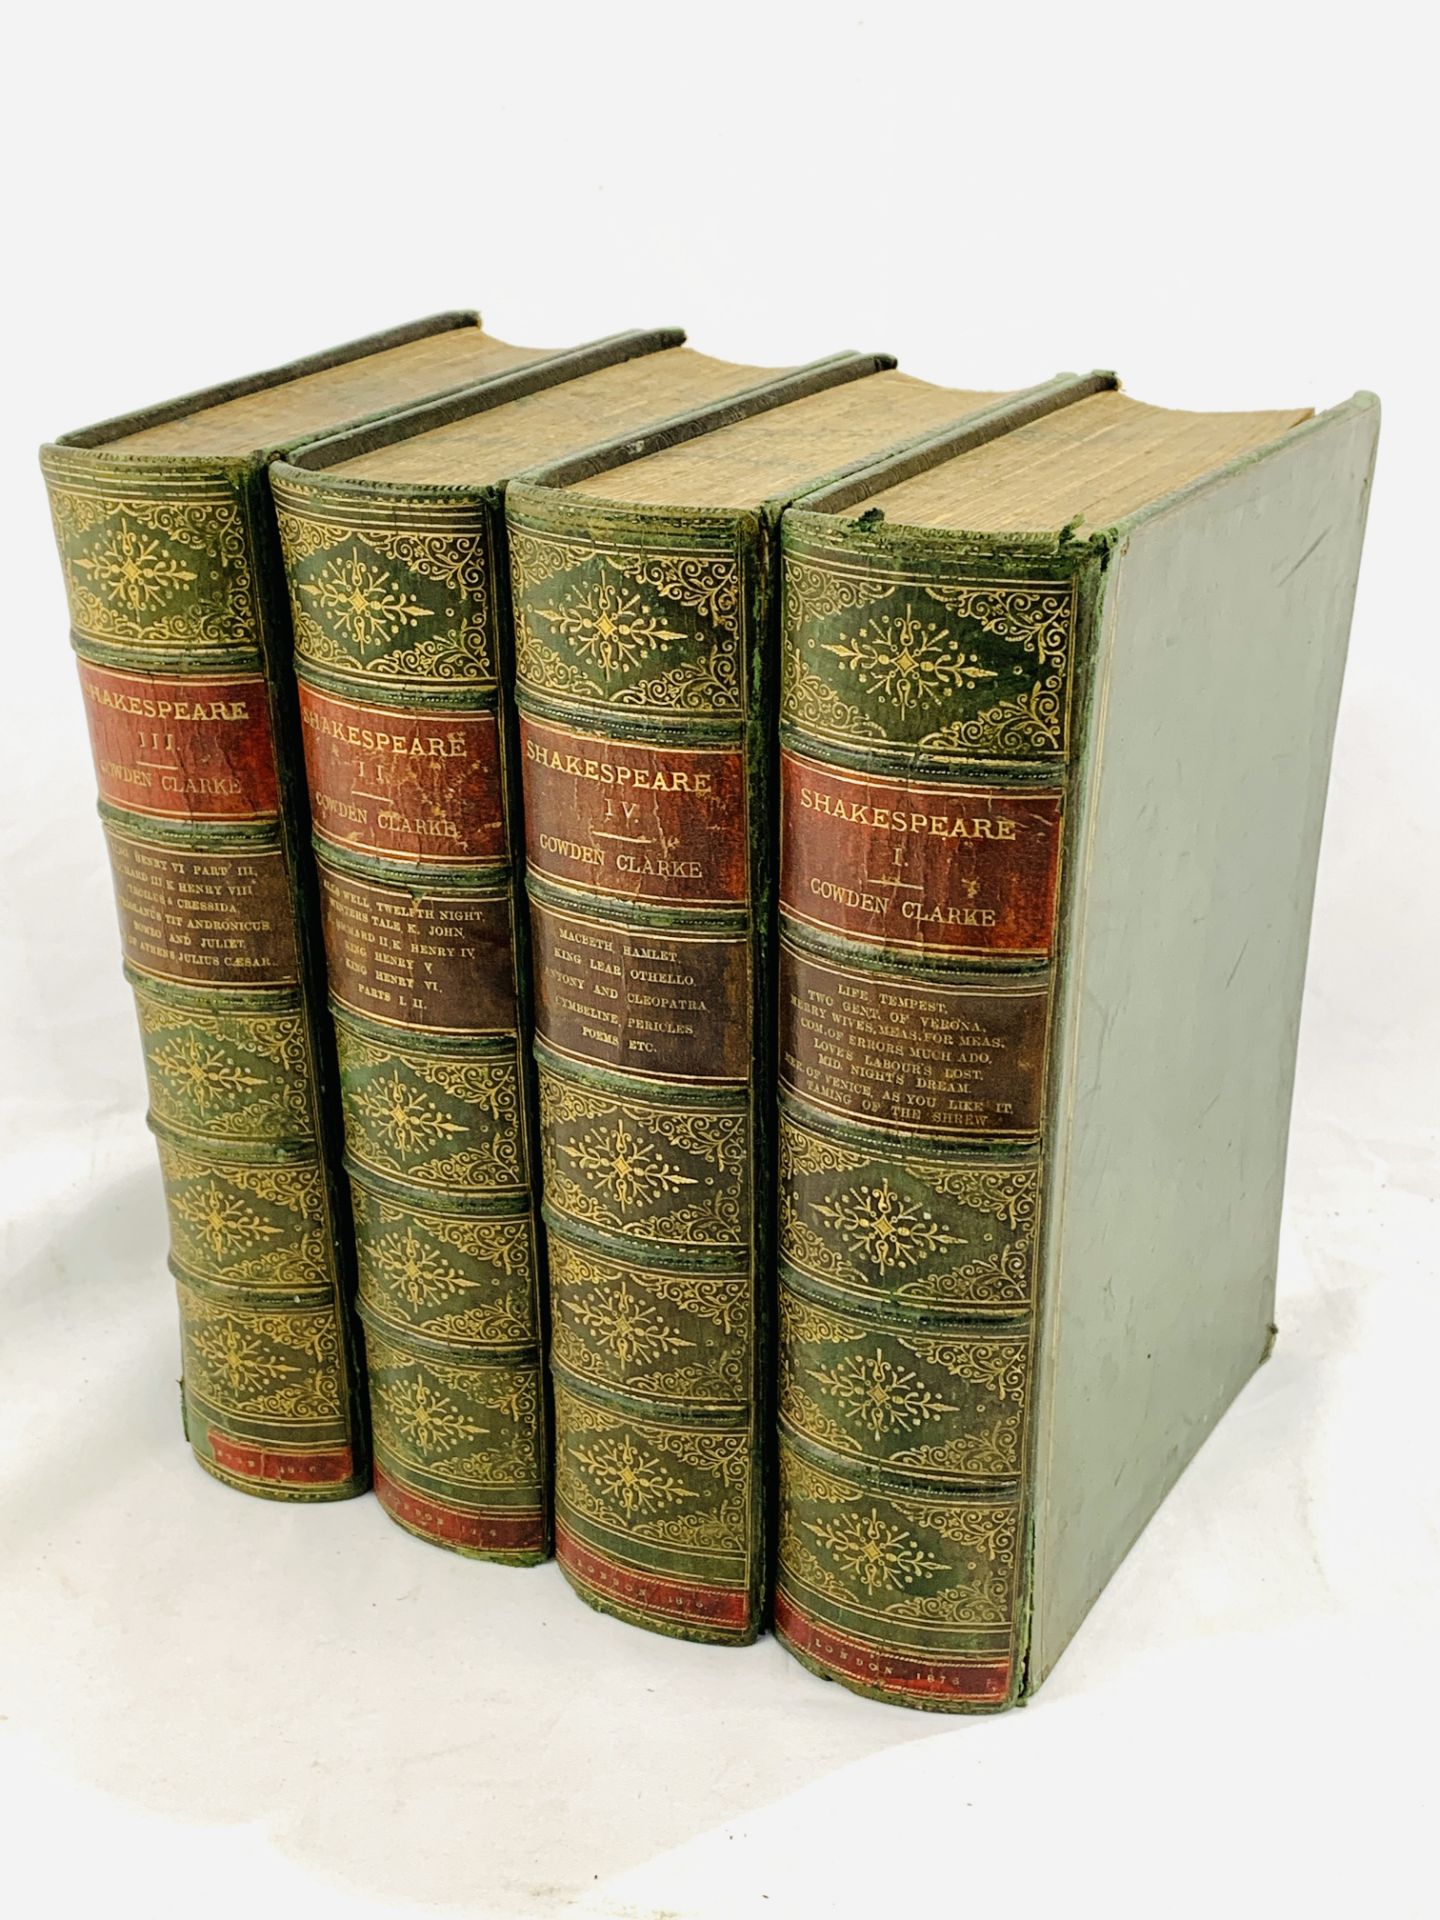 Shakespeare finely bound by Bickers in full green Morocco, 1876, volumes 1-4